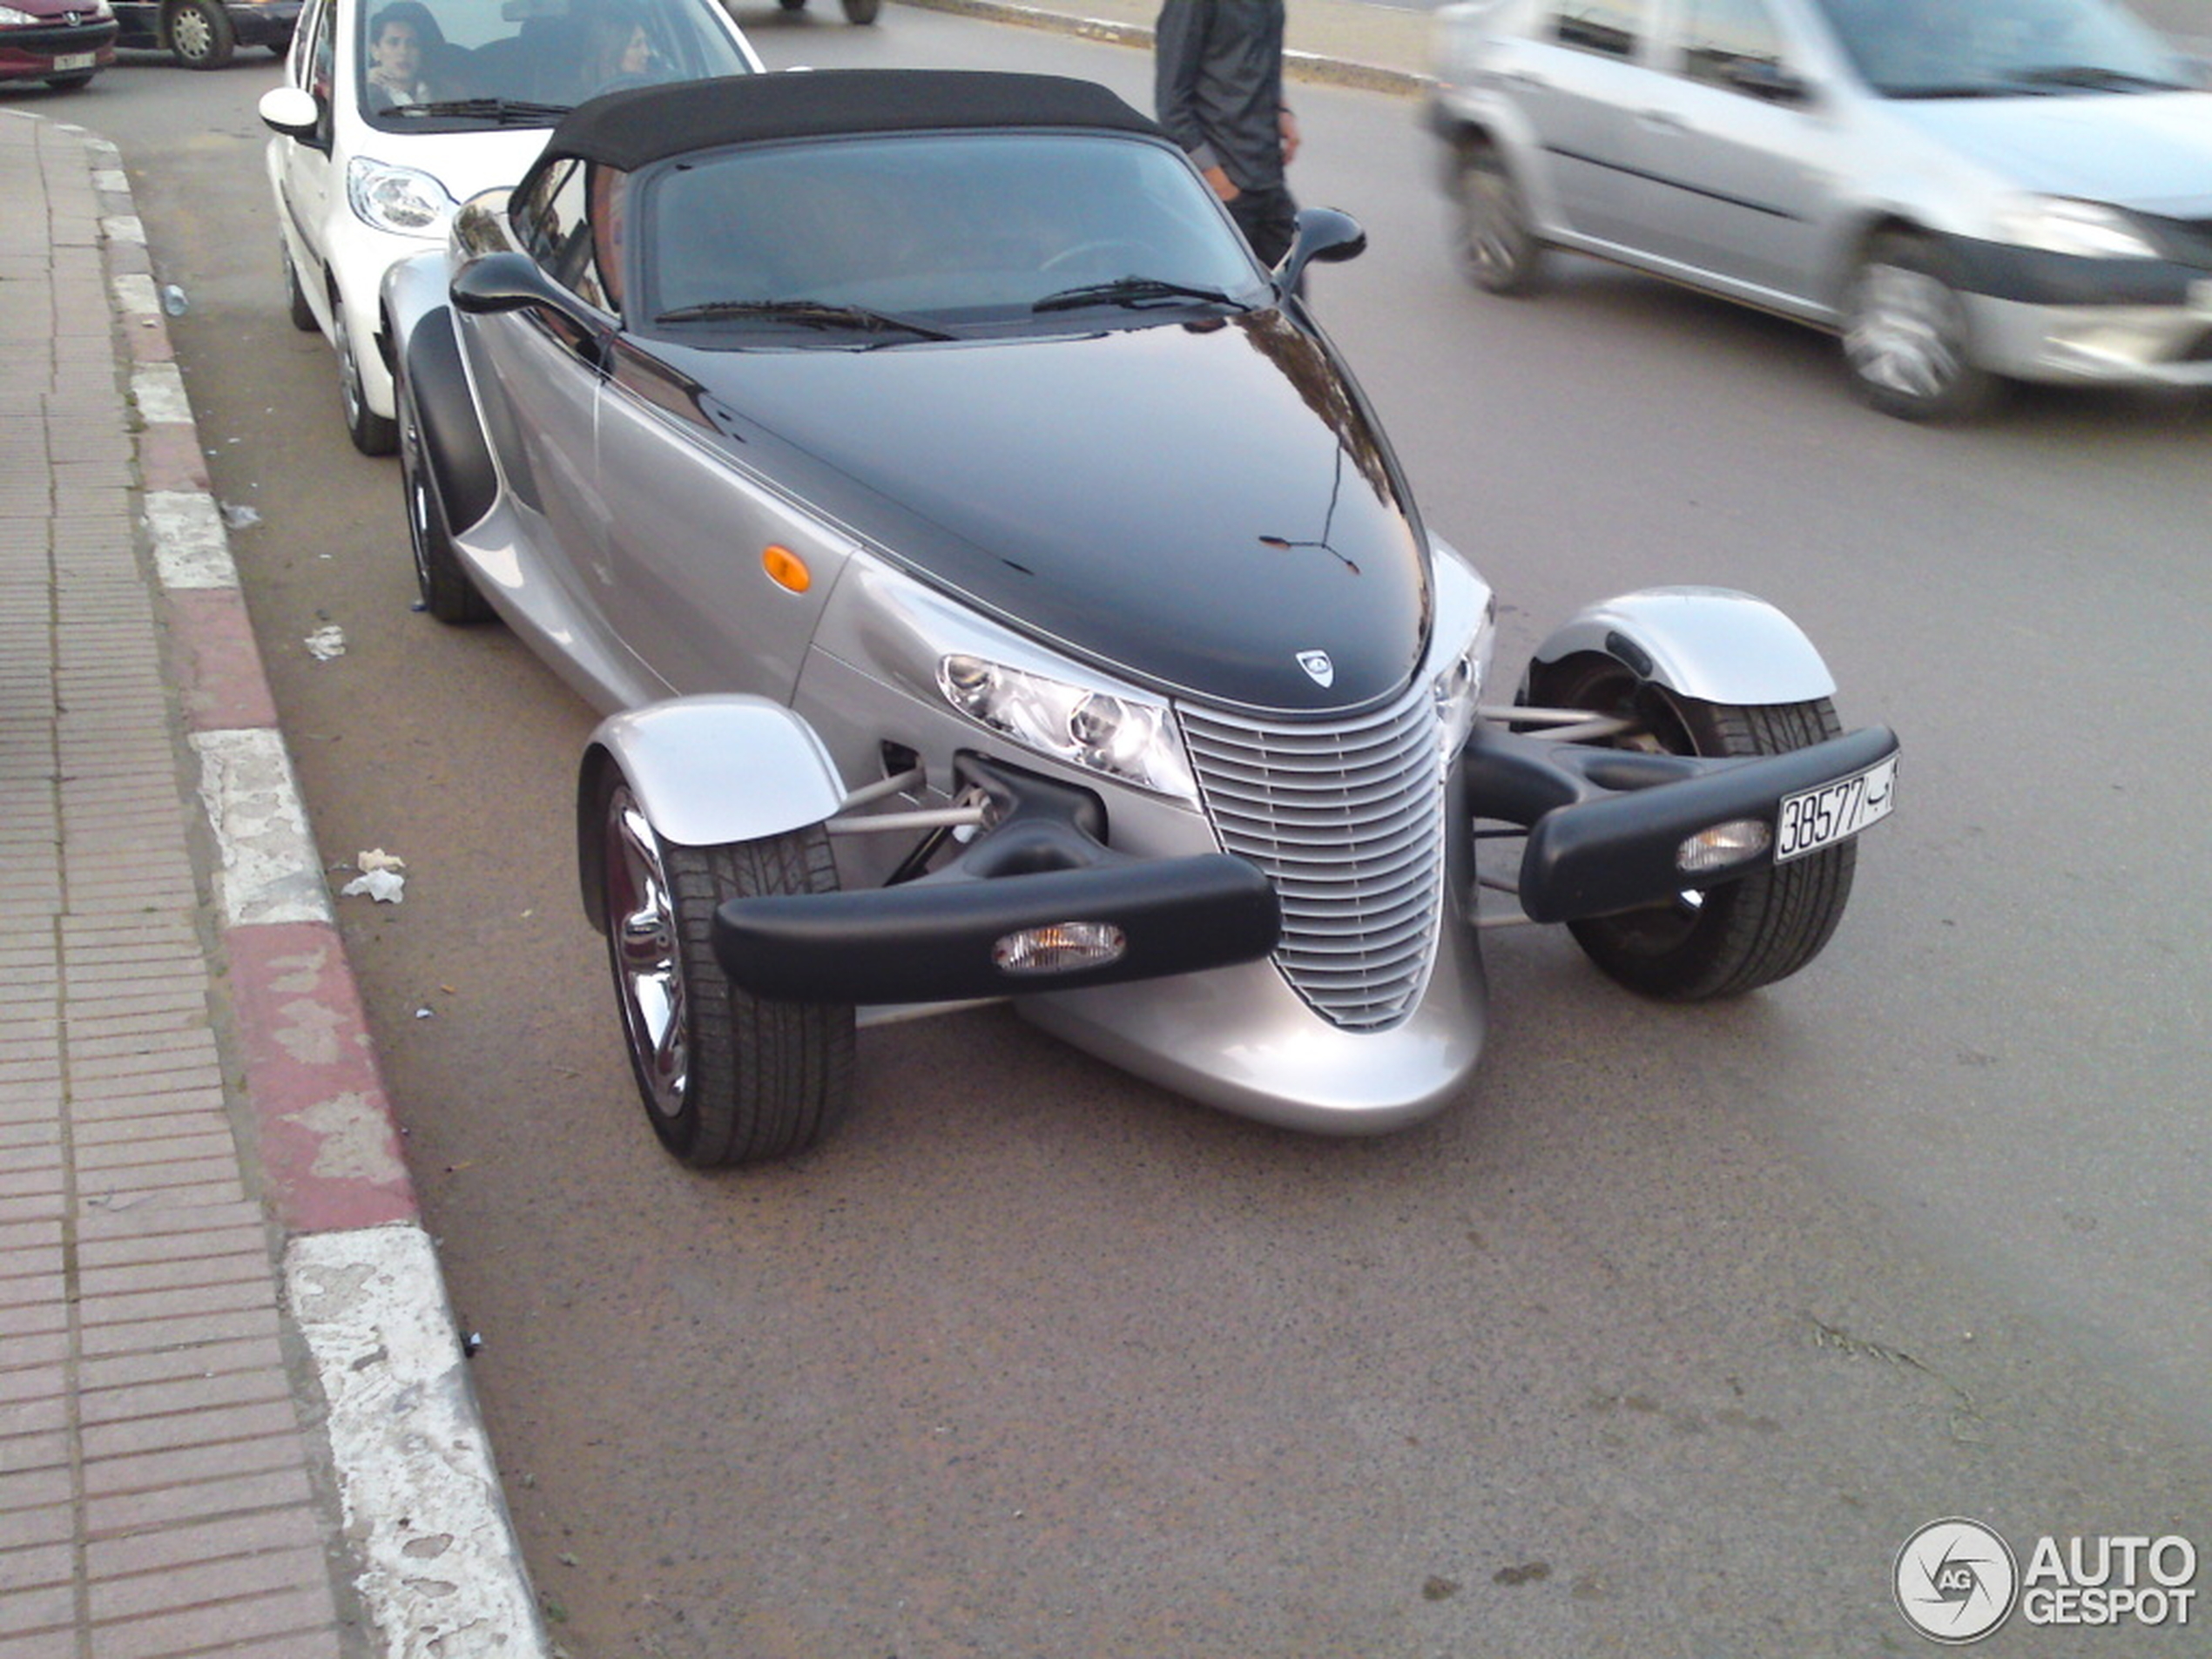 Plymouth Prowler Black Tie Edition